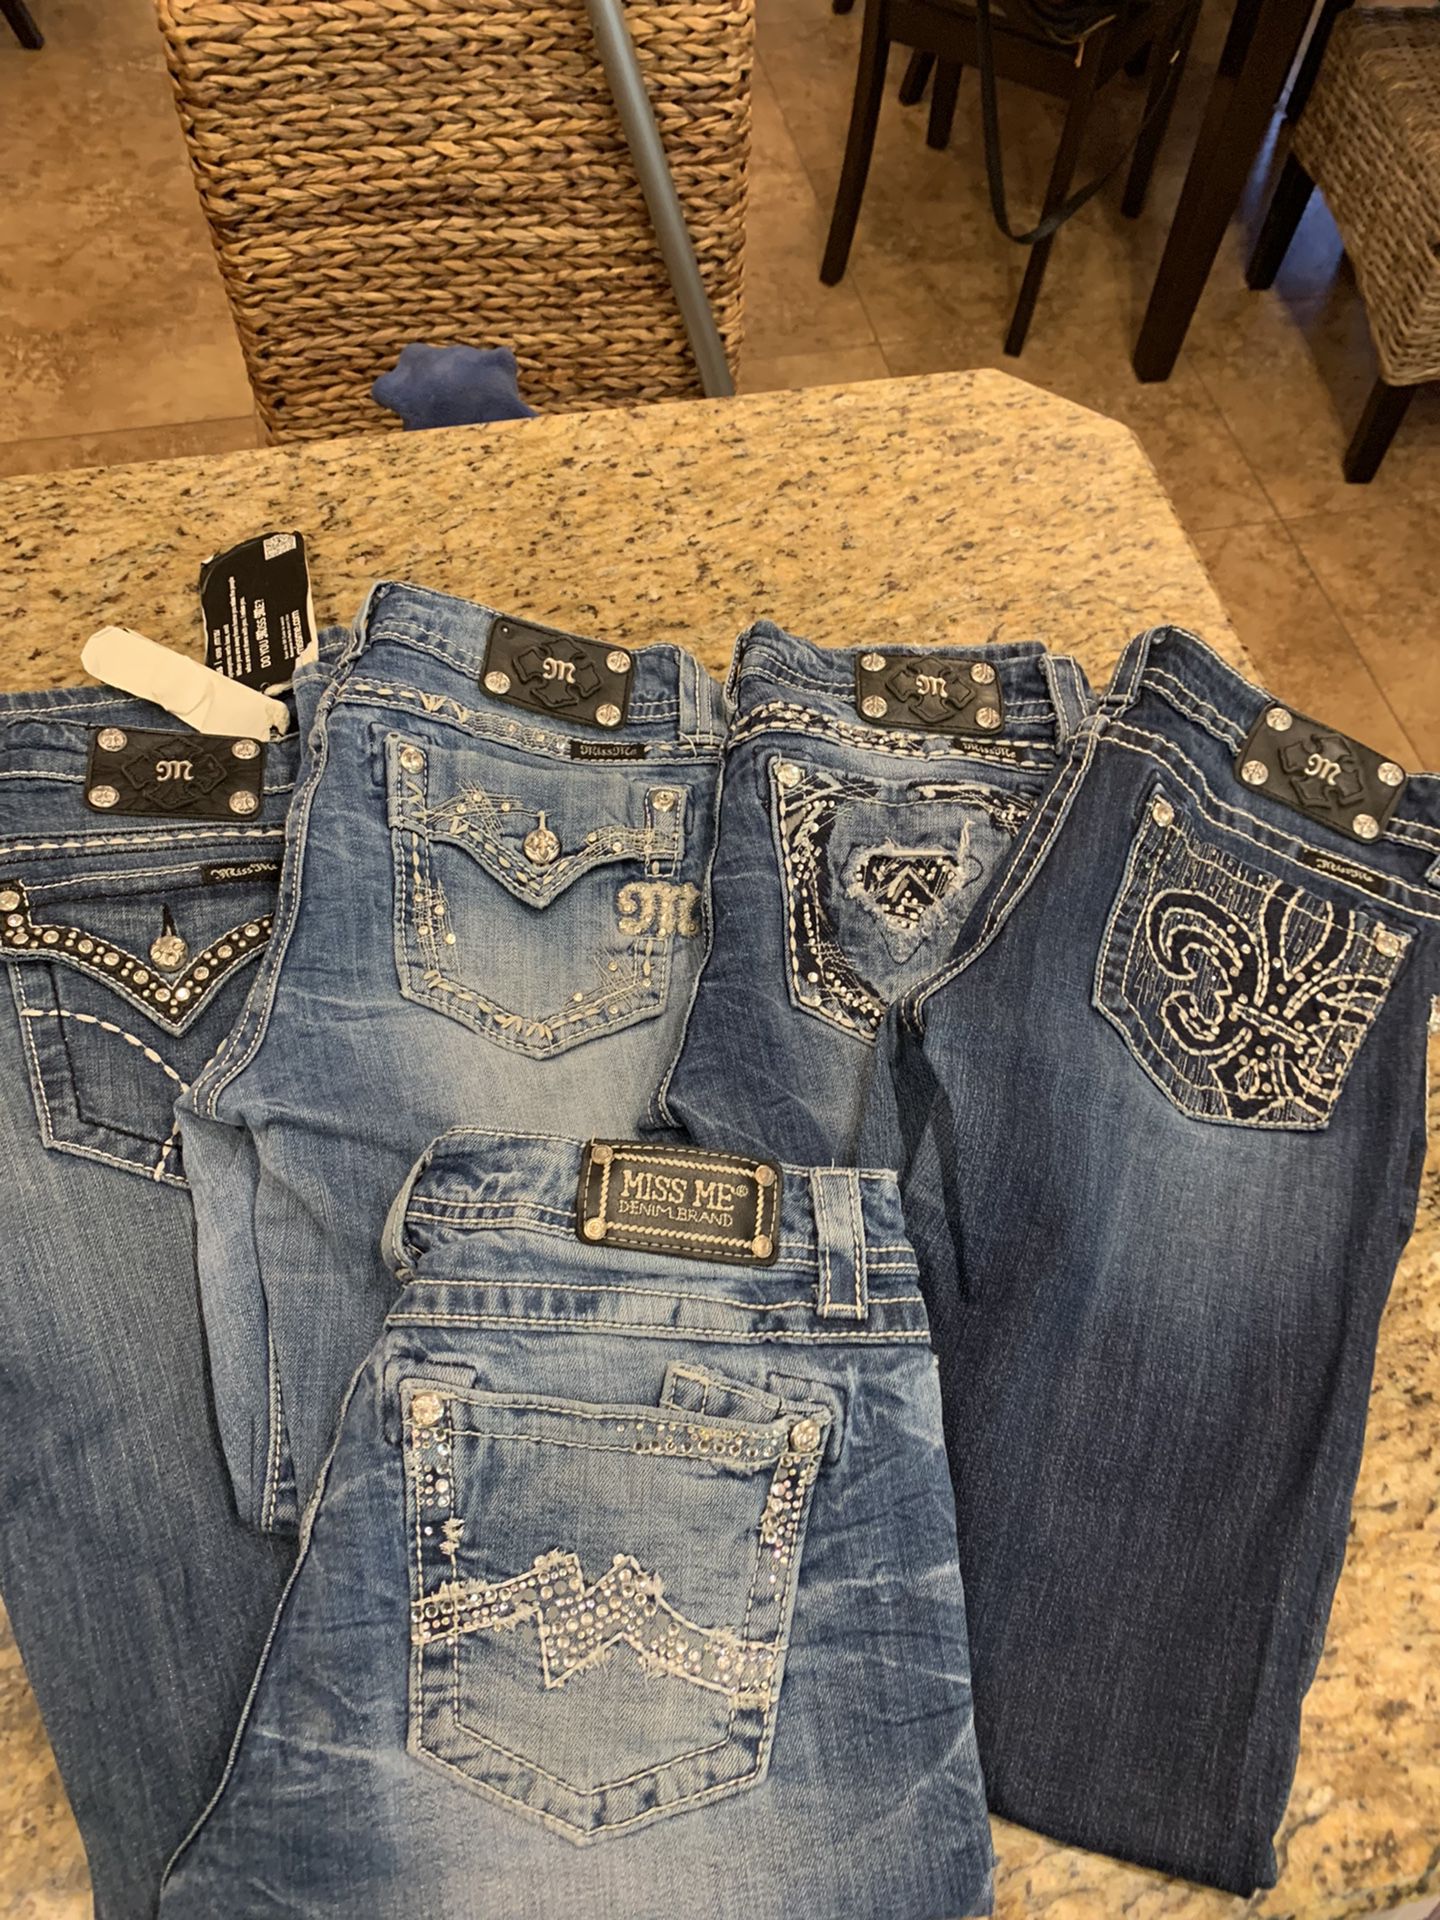 Me Jeans/Shorts Sale in Somerton, - OfferUp